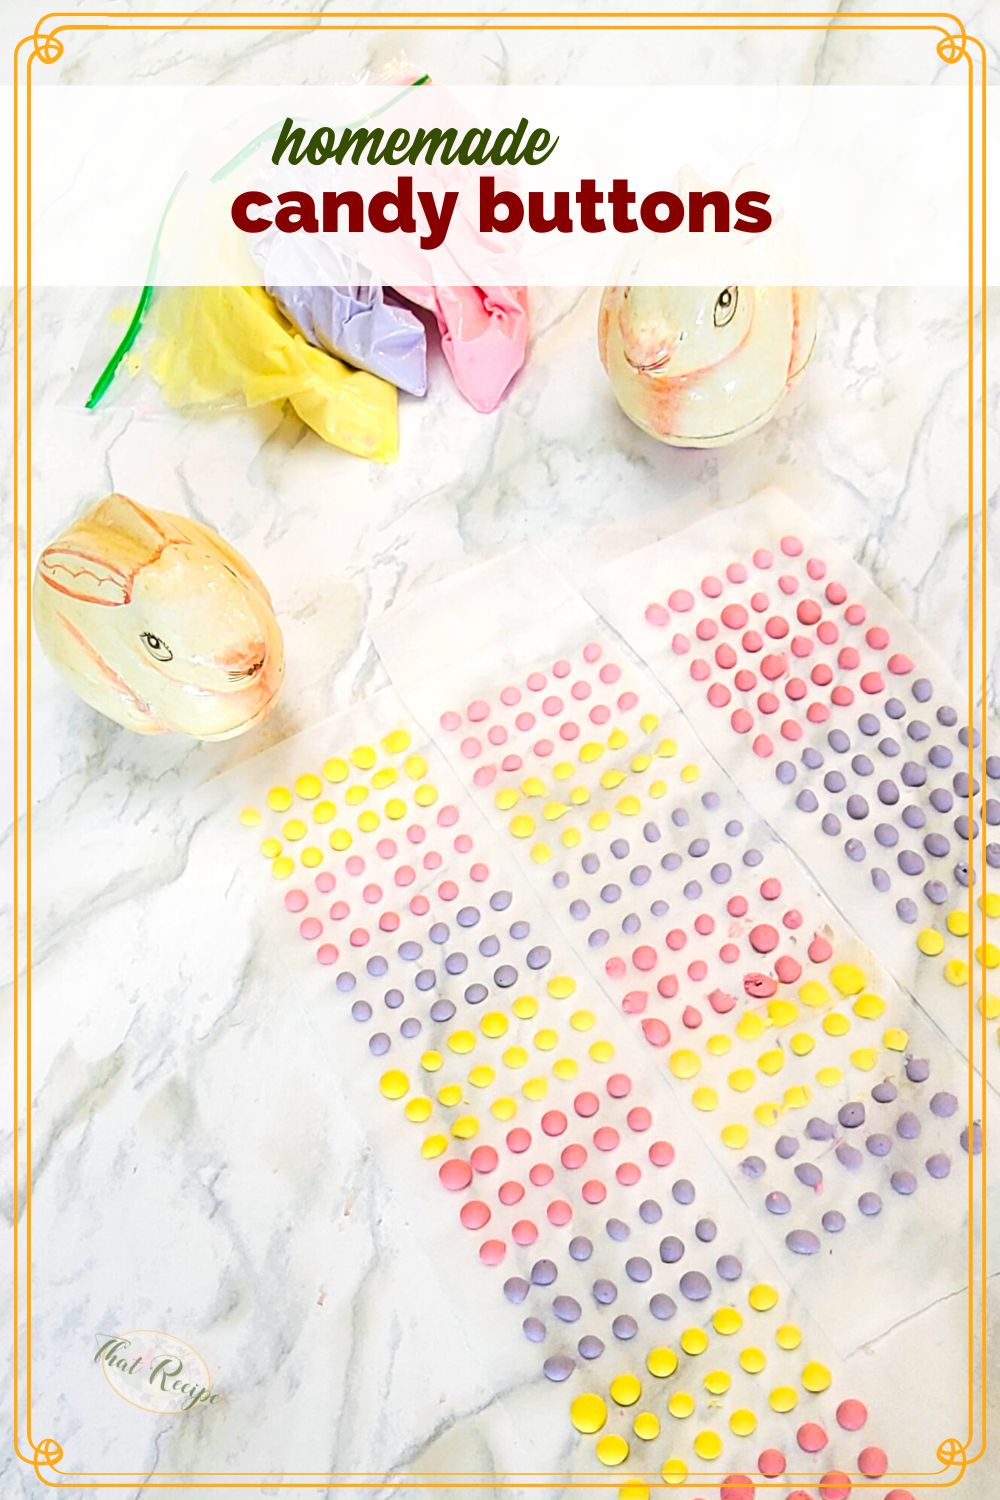 candy buttons (candy dots) with decorative rabbits on a marble background